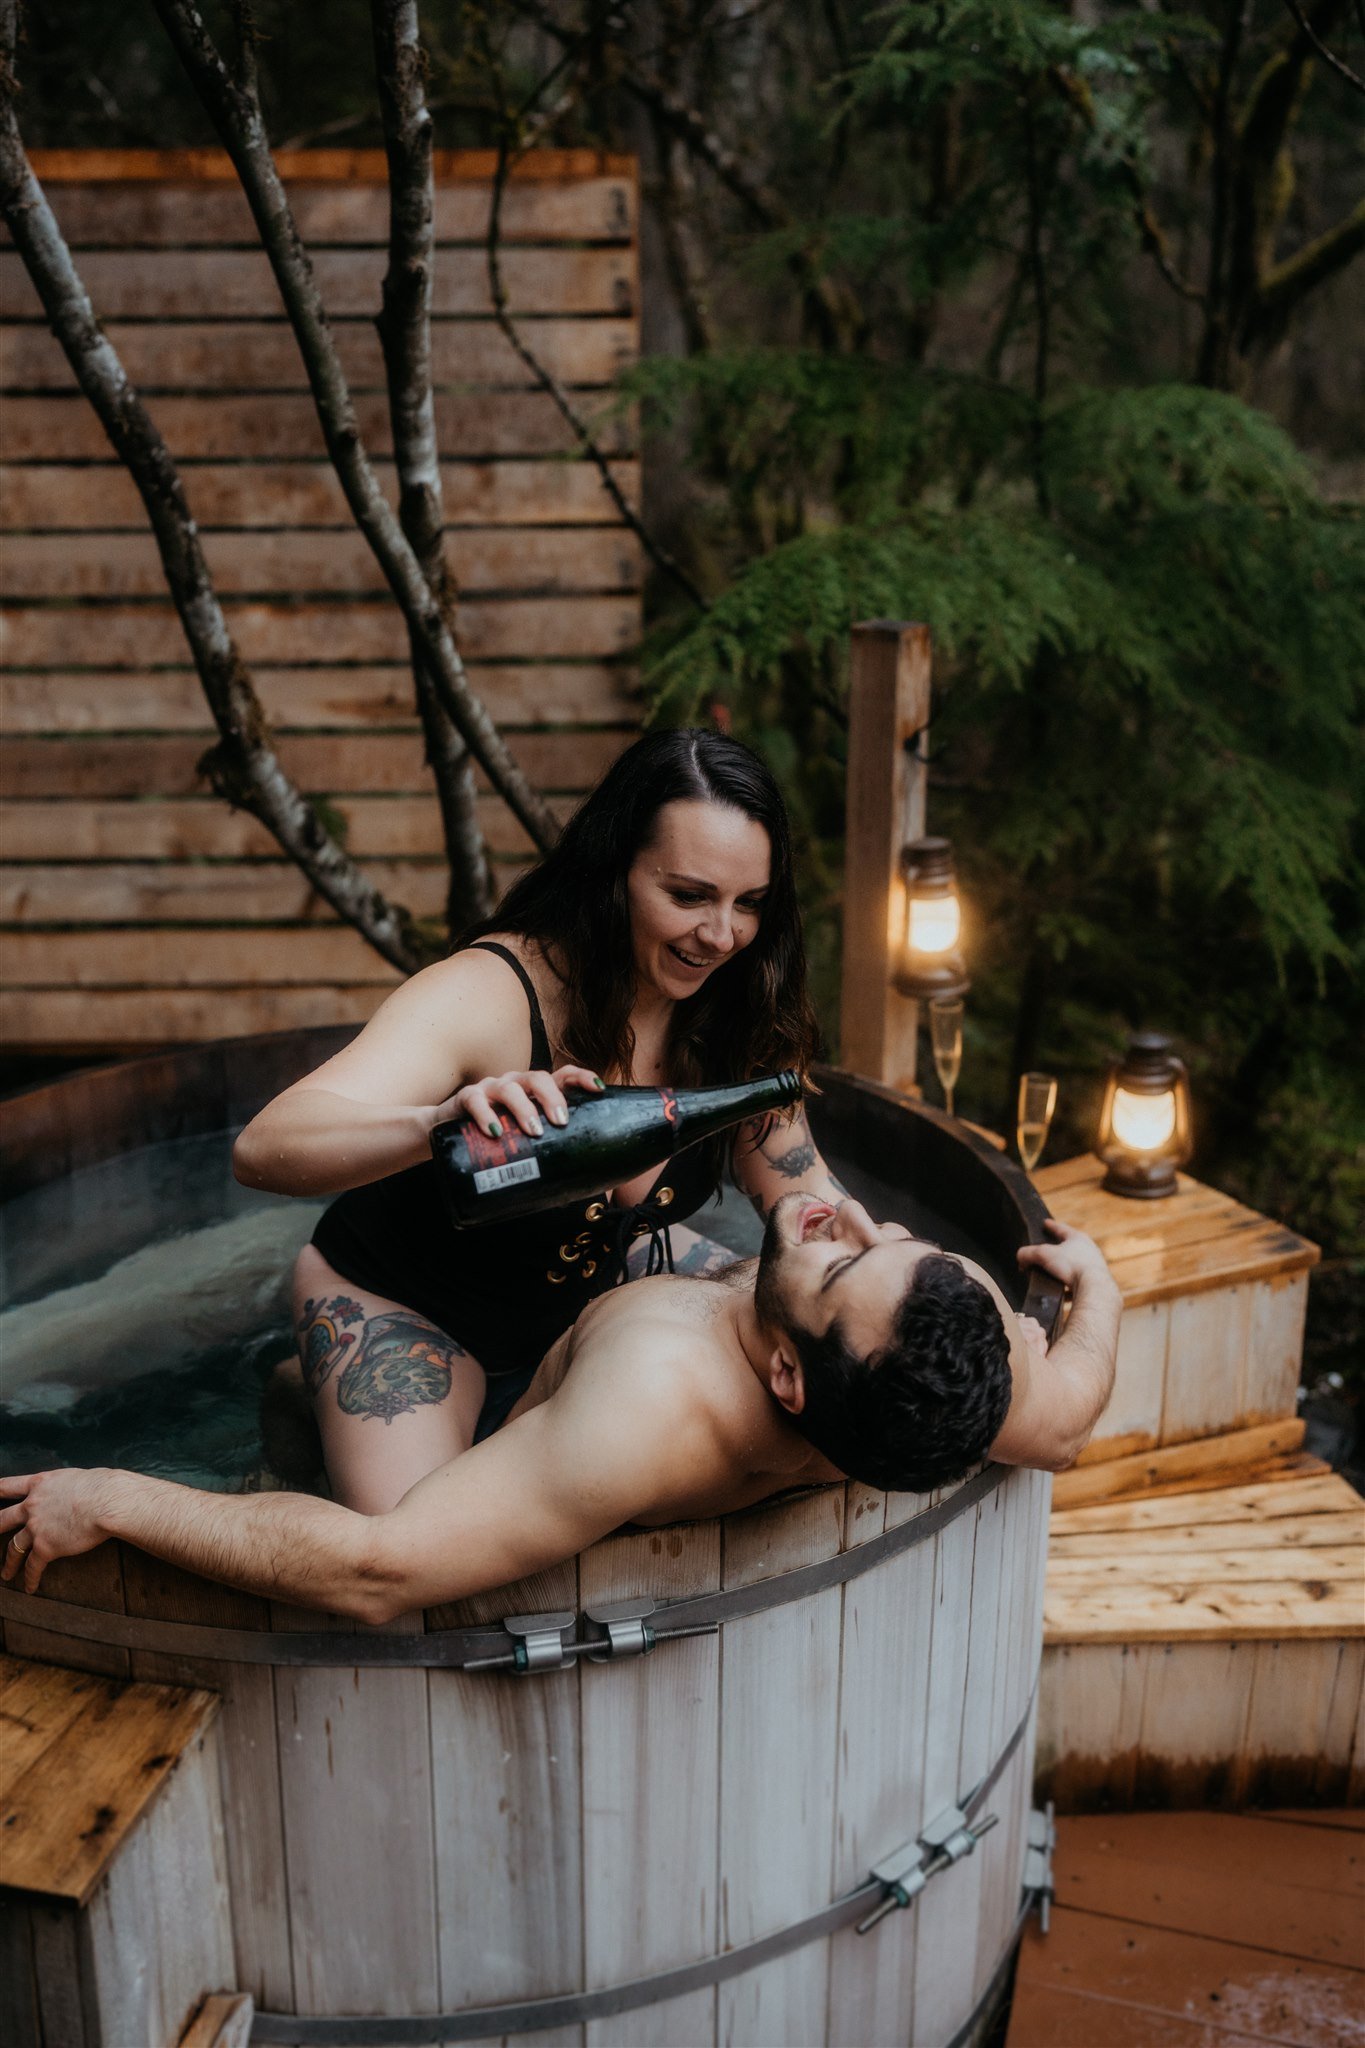 Bride and groom drink champagne in barrel hot tub after snowy hiking elopement